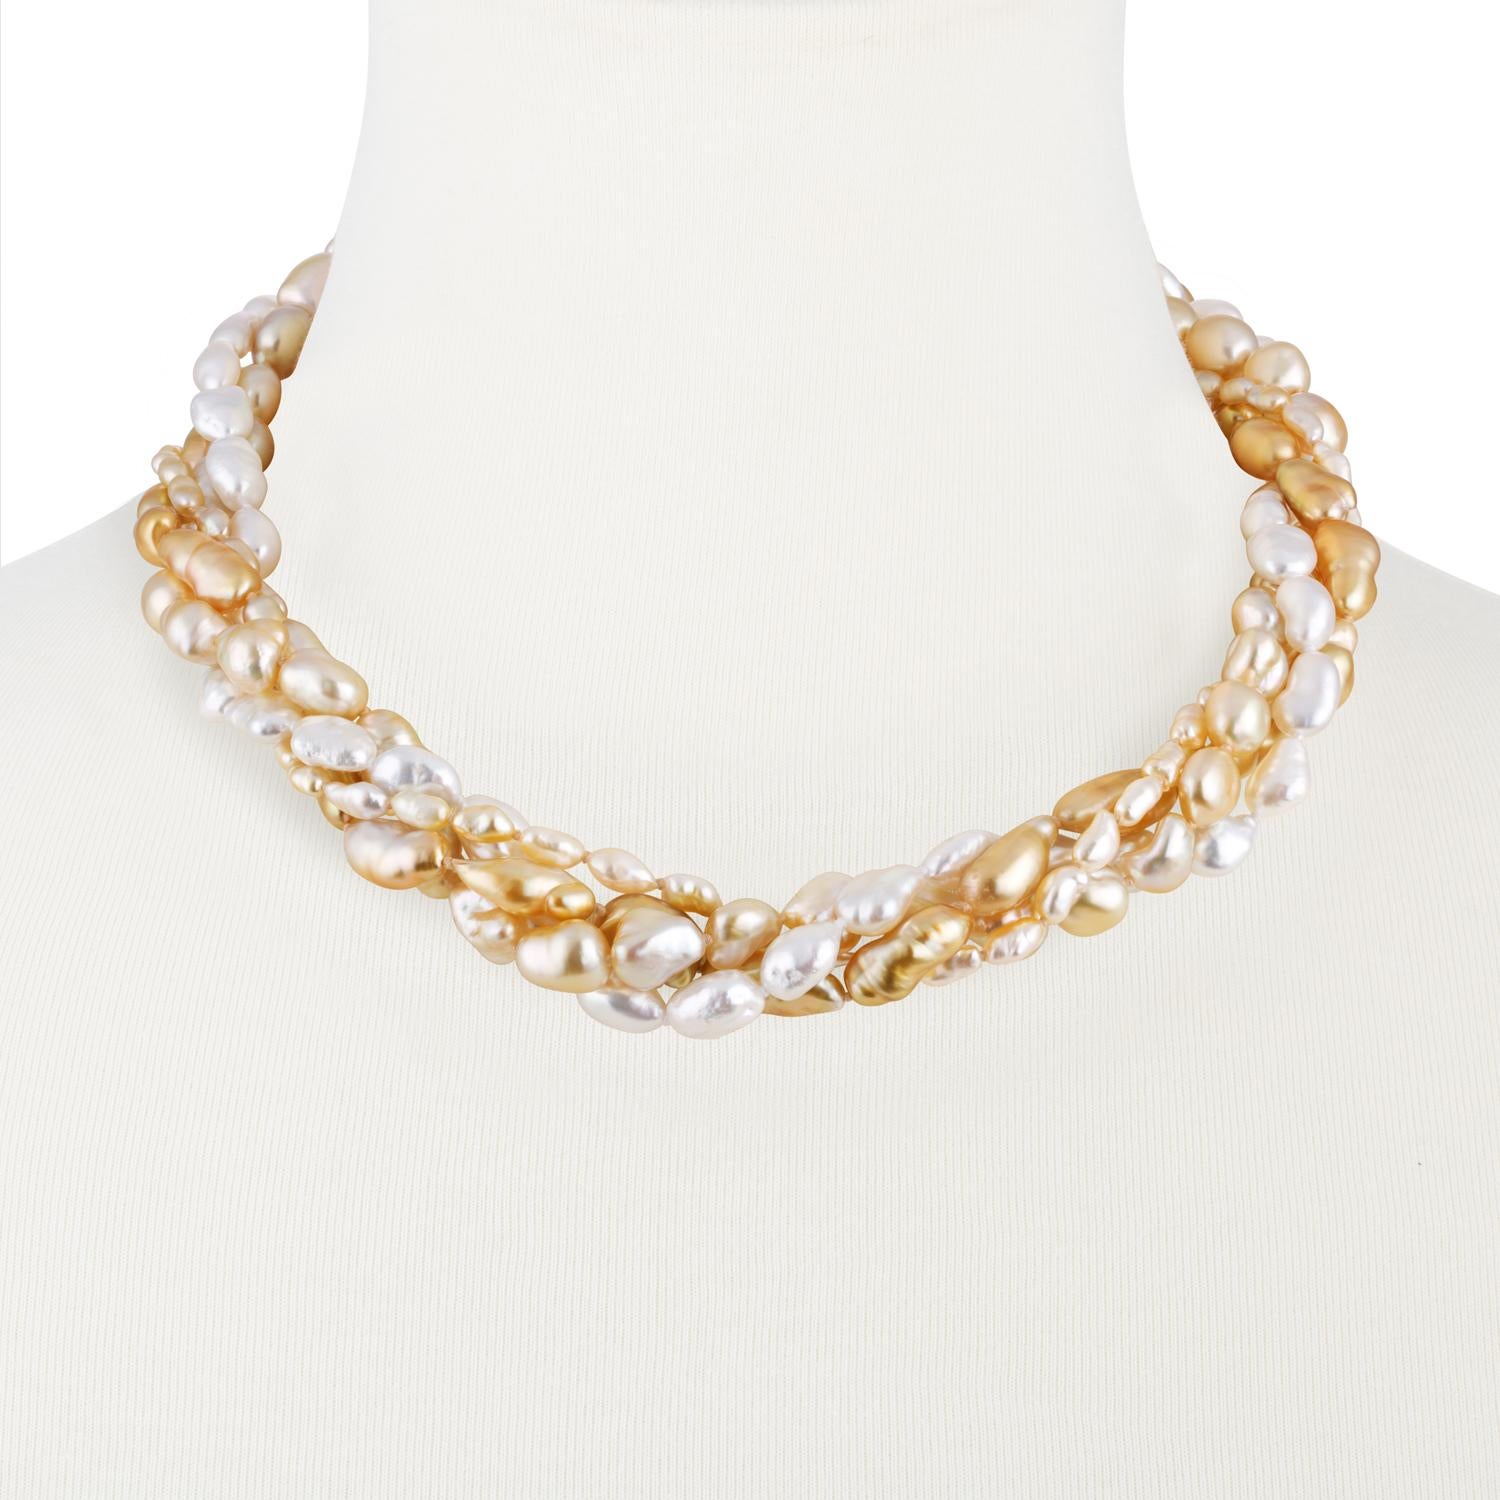 Contemporary South Sea White and Golden Keshi Pearl Necklace with 14 Karat Gold Clasp For Sale